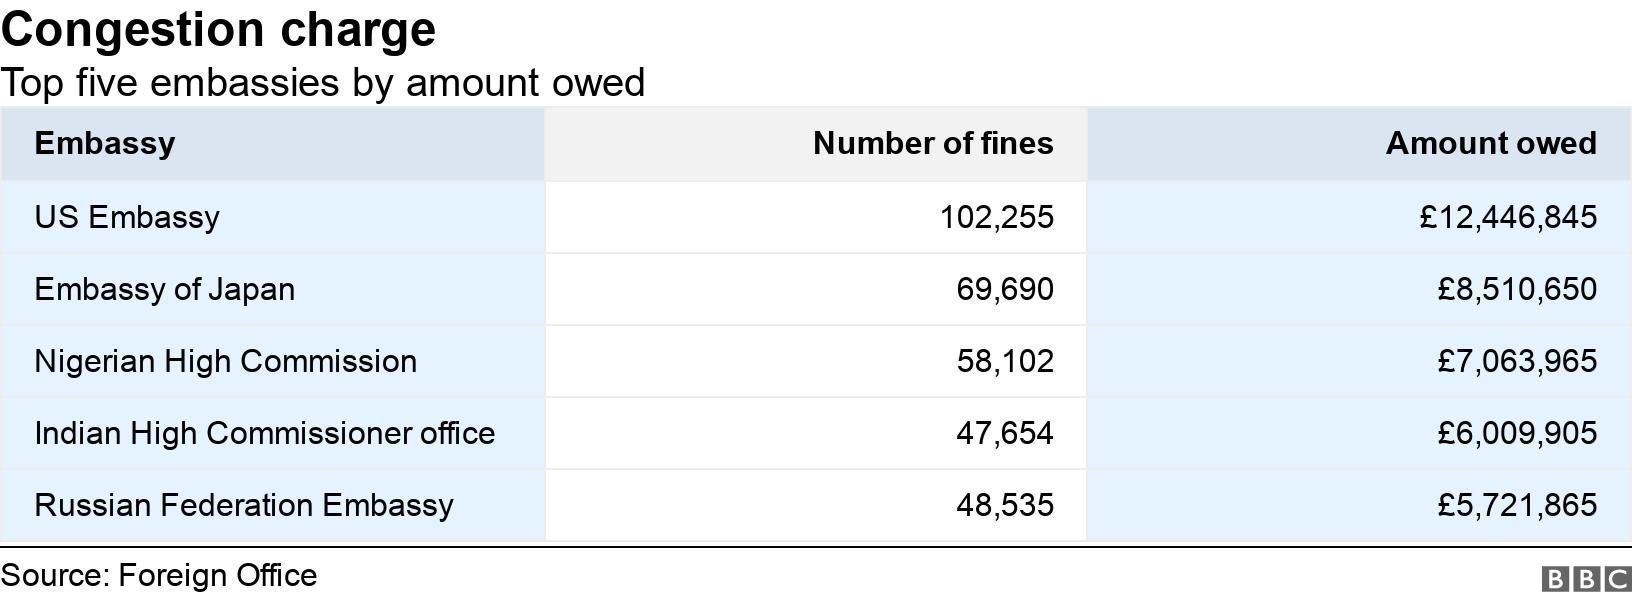 Congestion charge. Top five embassies by amount owed.  .